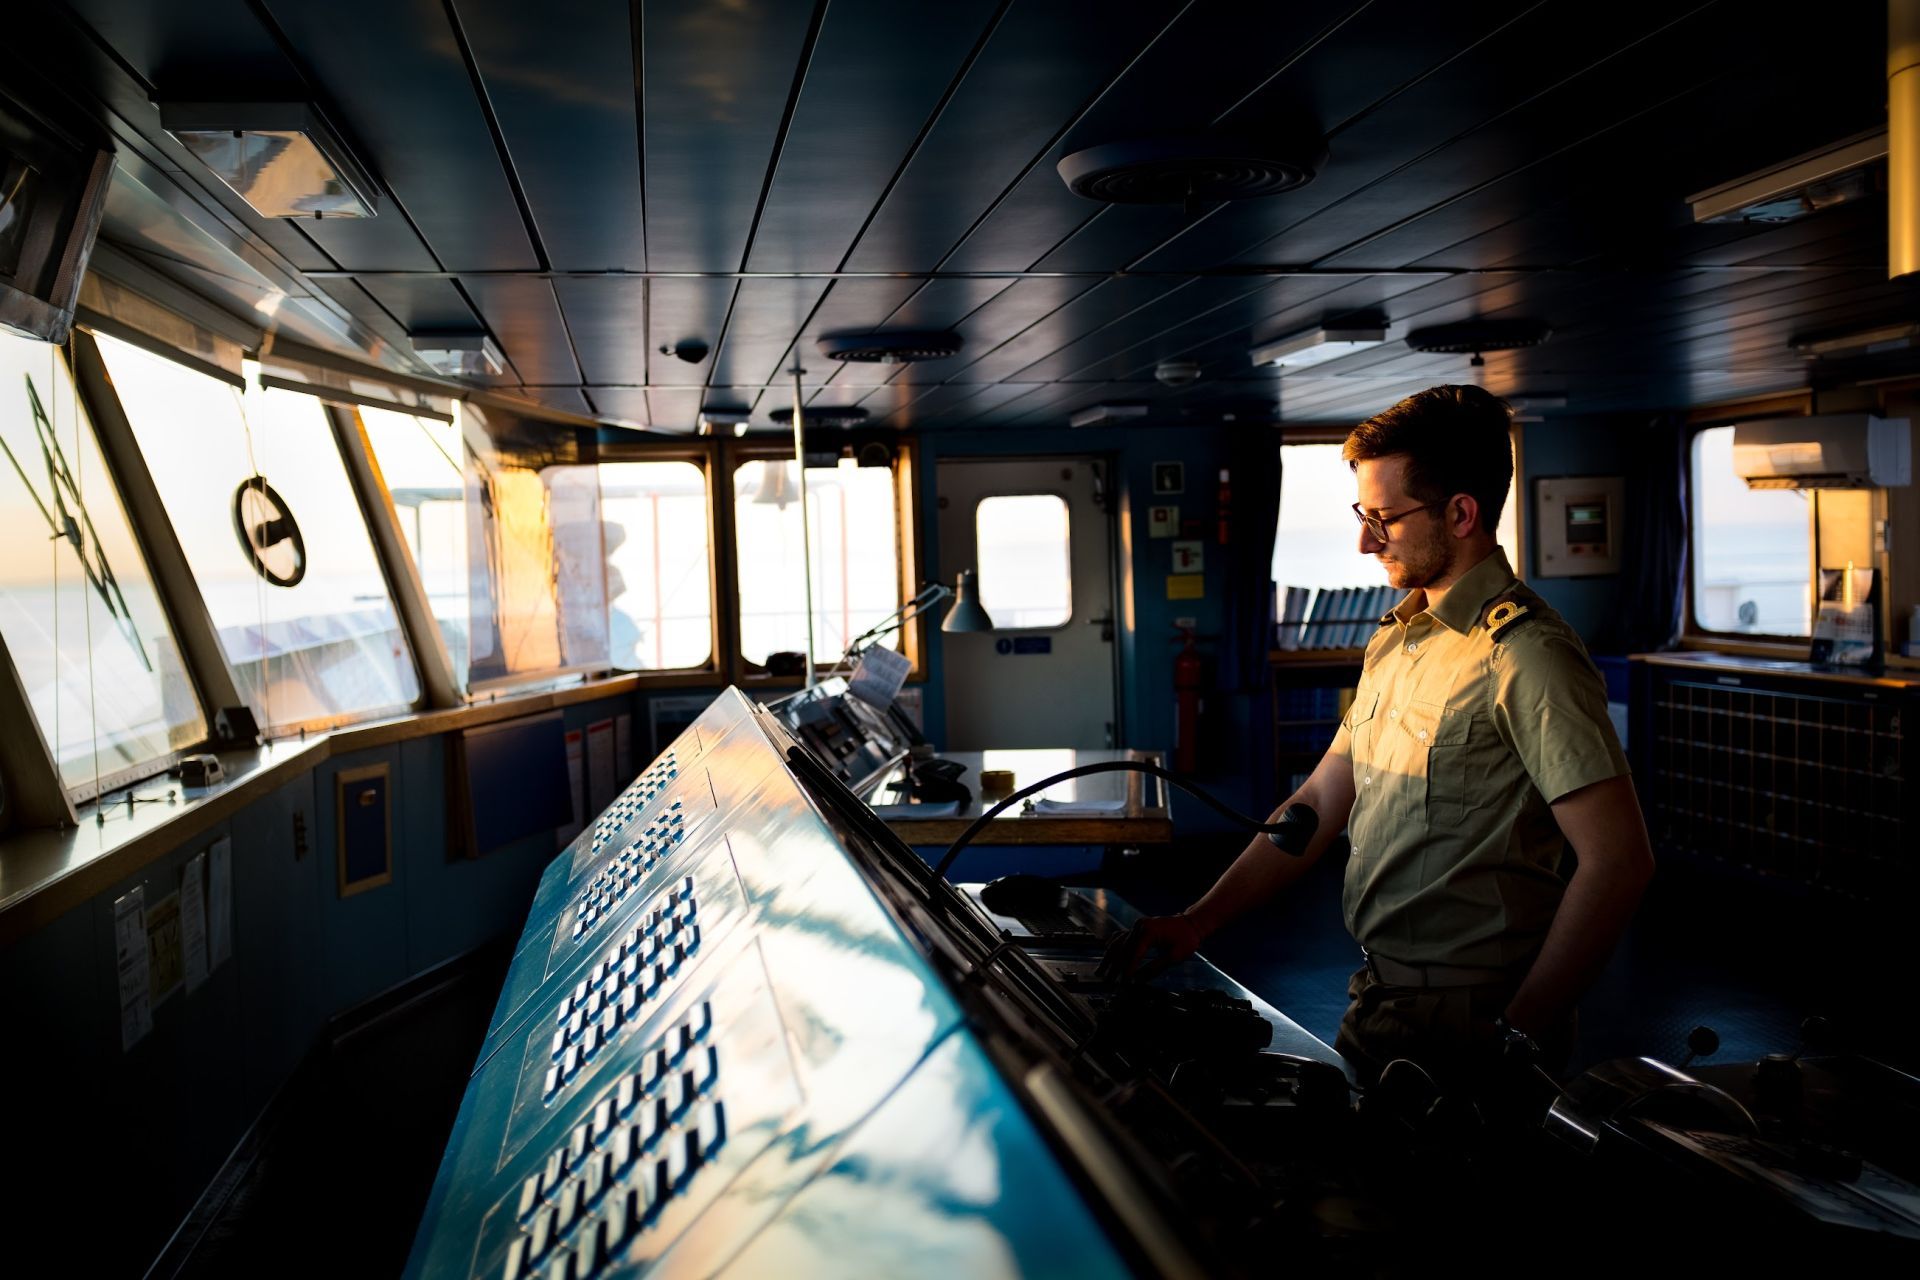 Ship officer operating navigational equipment in the bridge of a vessel during golden hour.